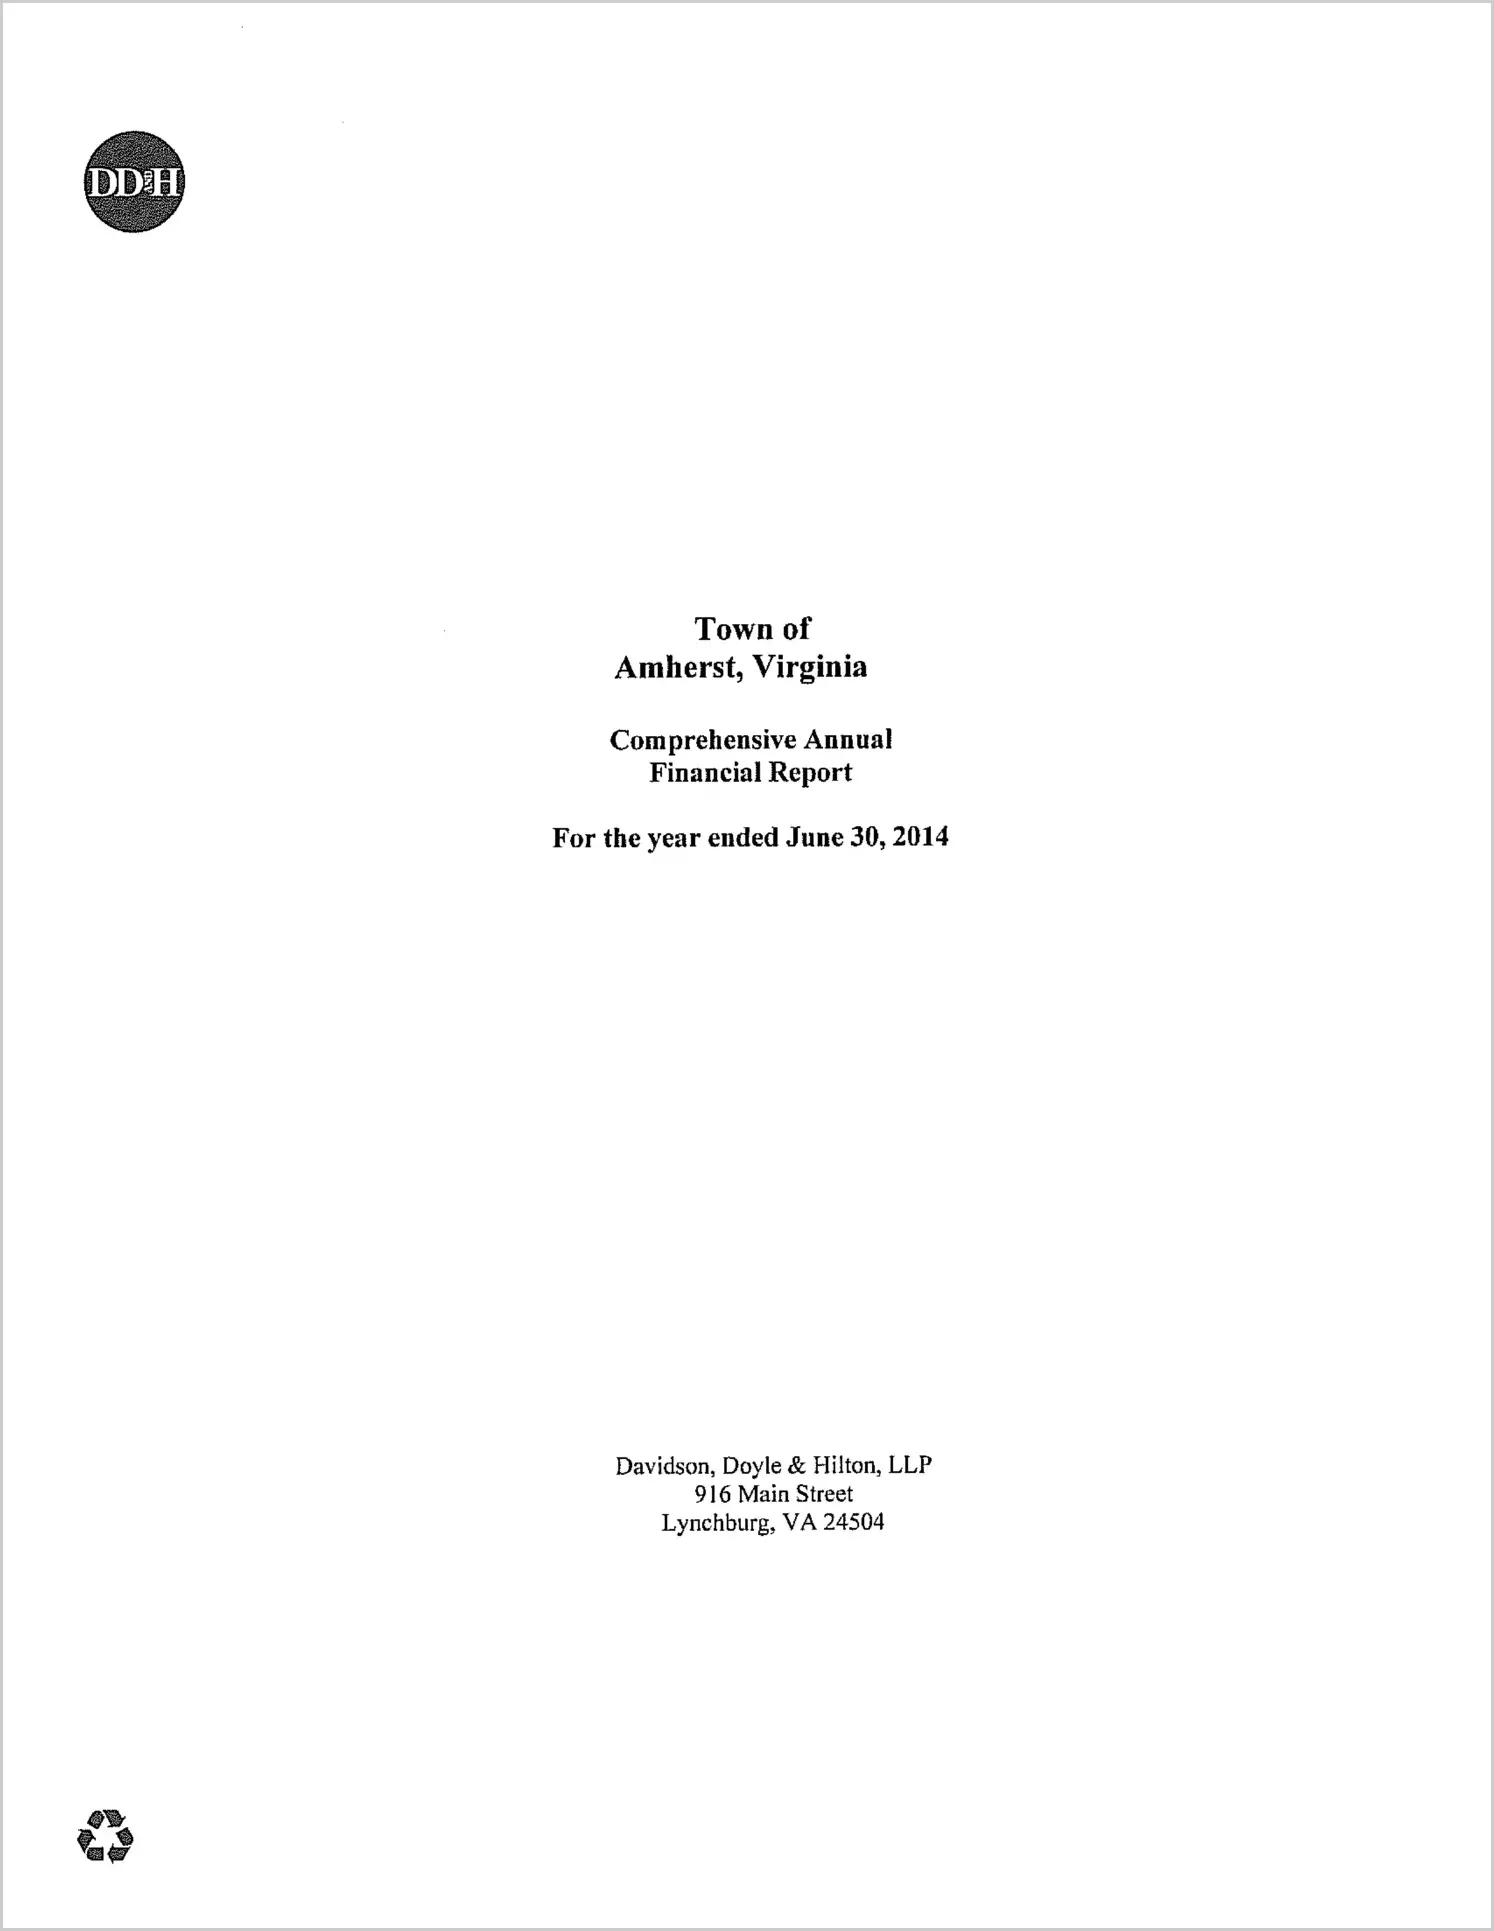 2014 Annual Financial Report for Town of Amherst